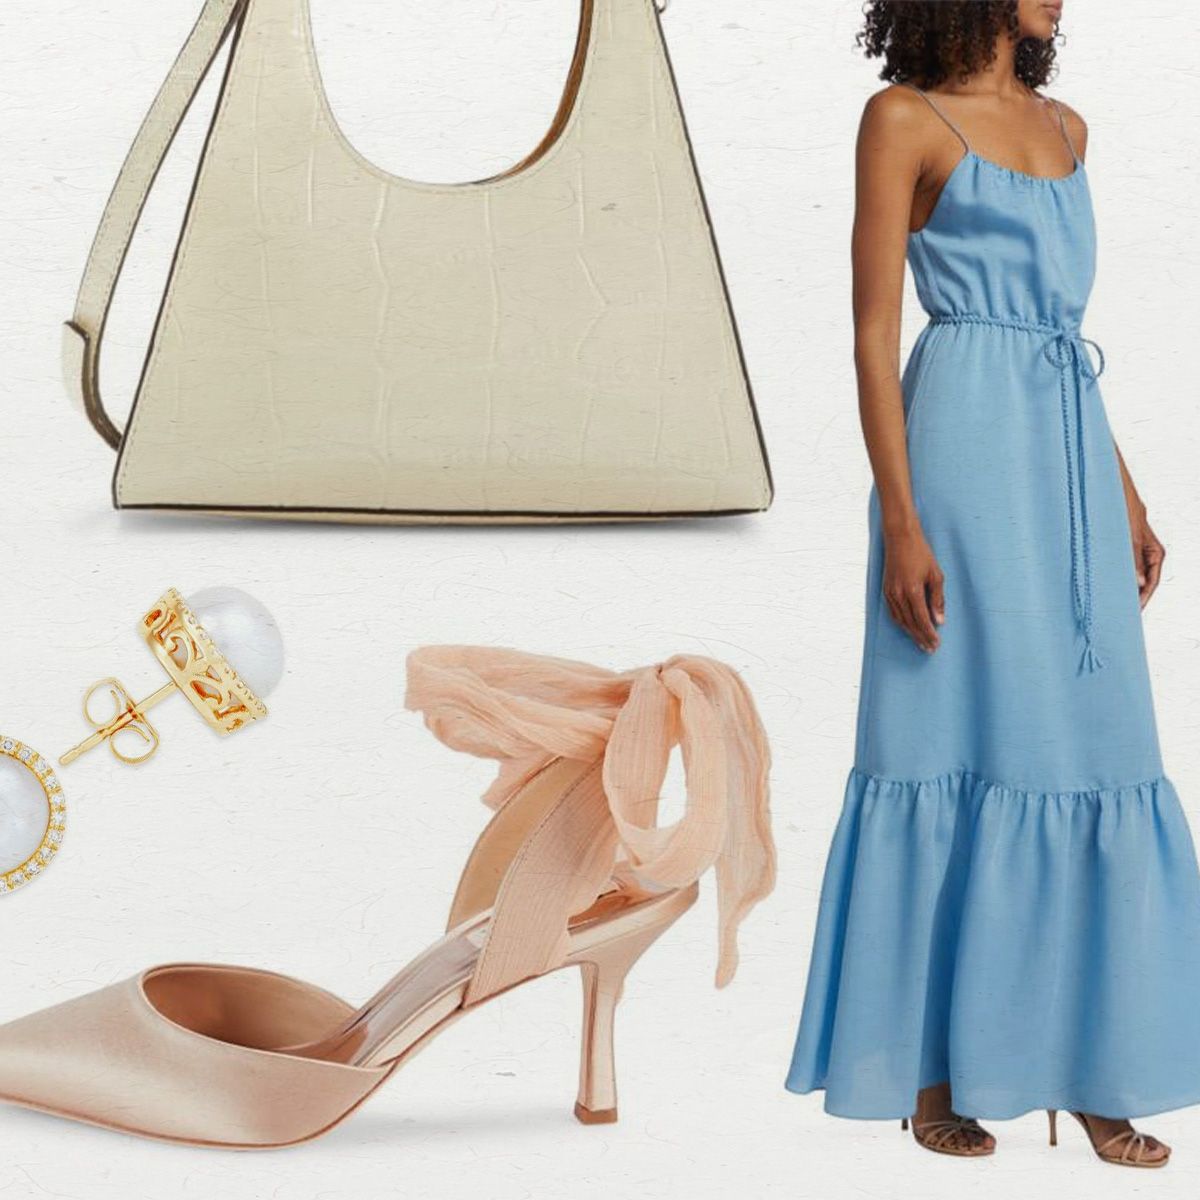 16 Elegant Finds That Are Perfect For a Spring Wedding